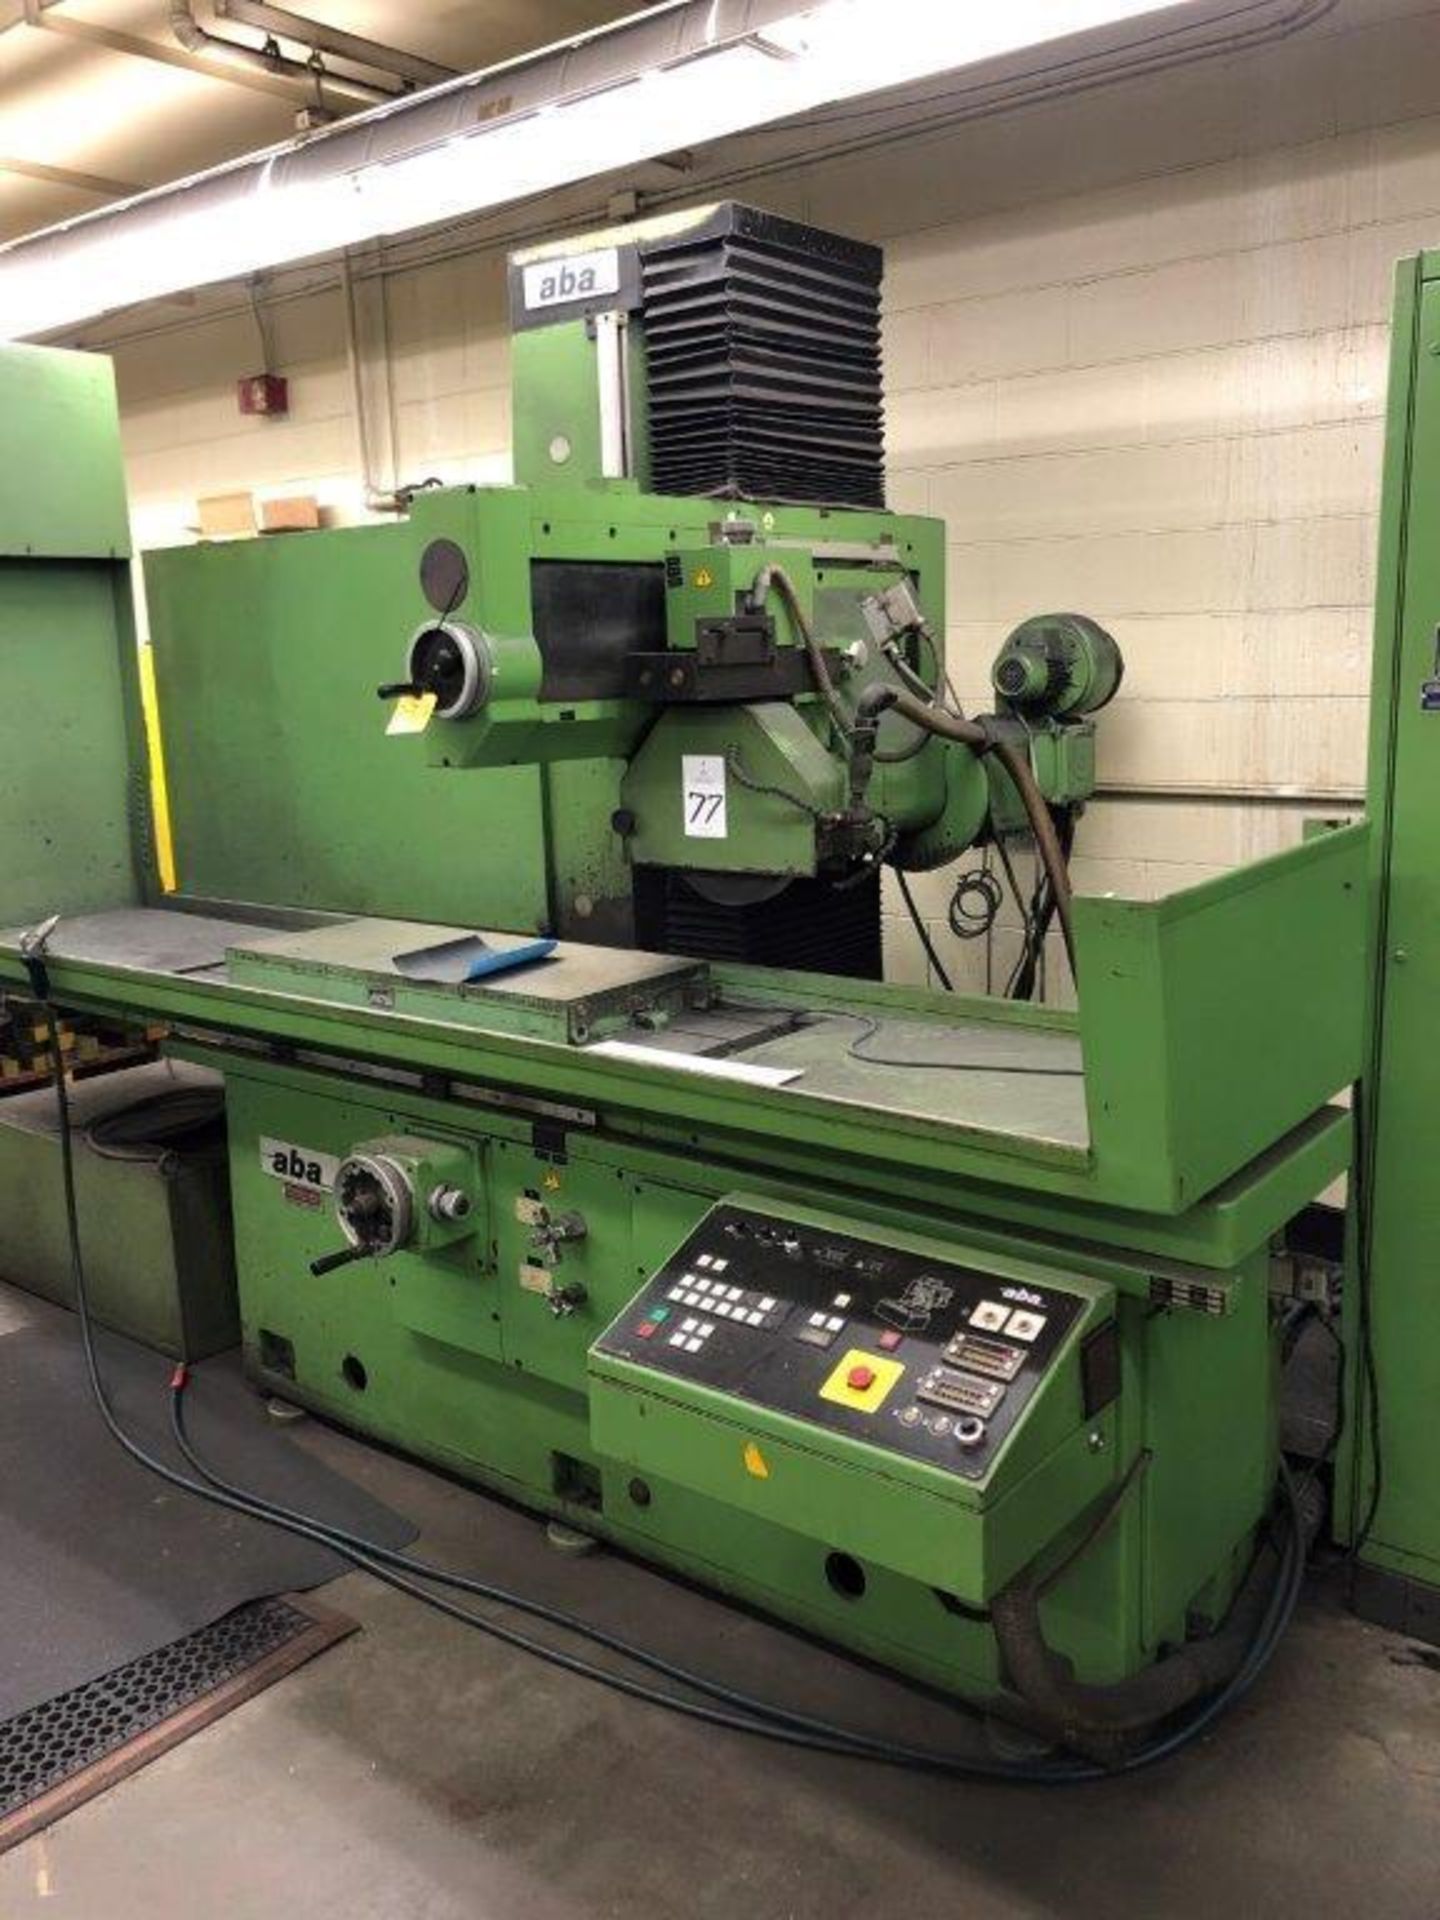 Aba FFU 1000/50 Surface Grinder, S/N 207990 (New 1986), 15.75" x 39" Electro-Magnetic Chuck